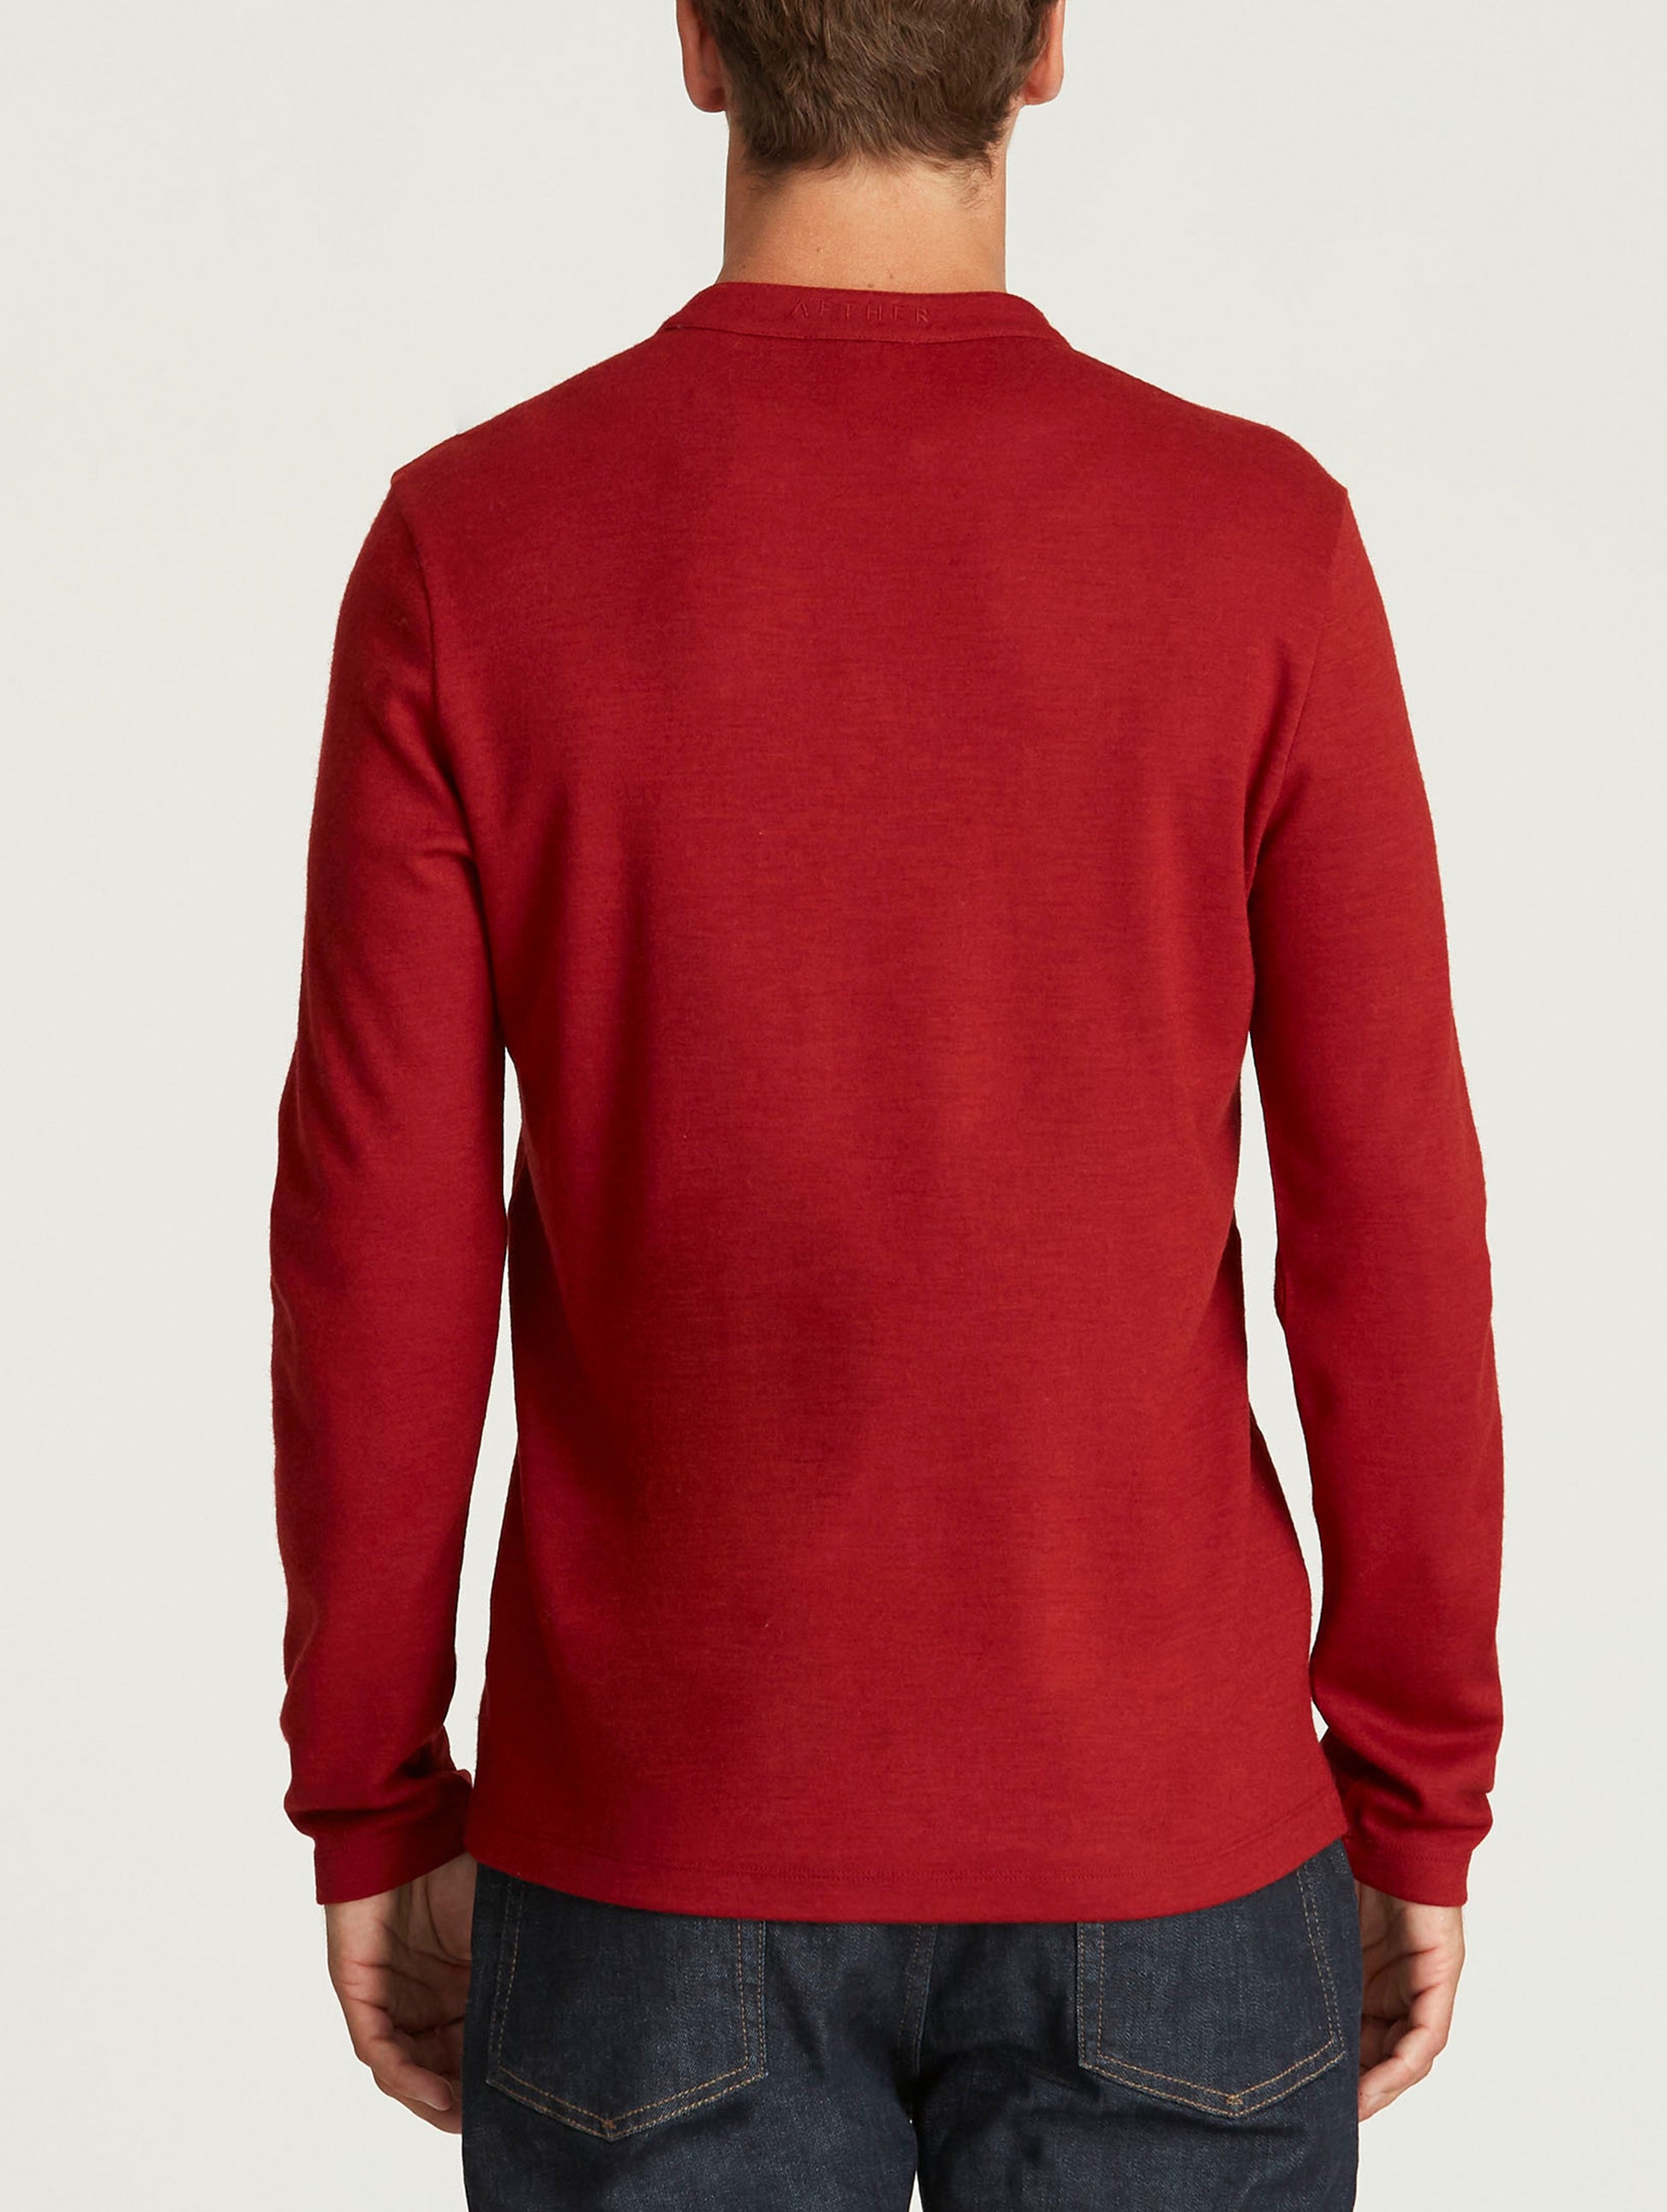 henley shirt for men from Aether Apparel